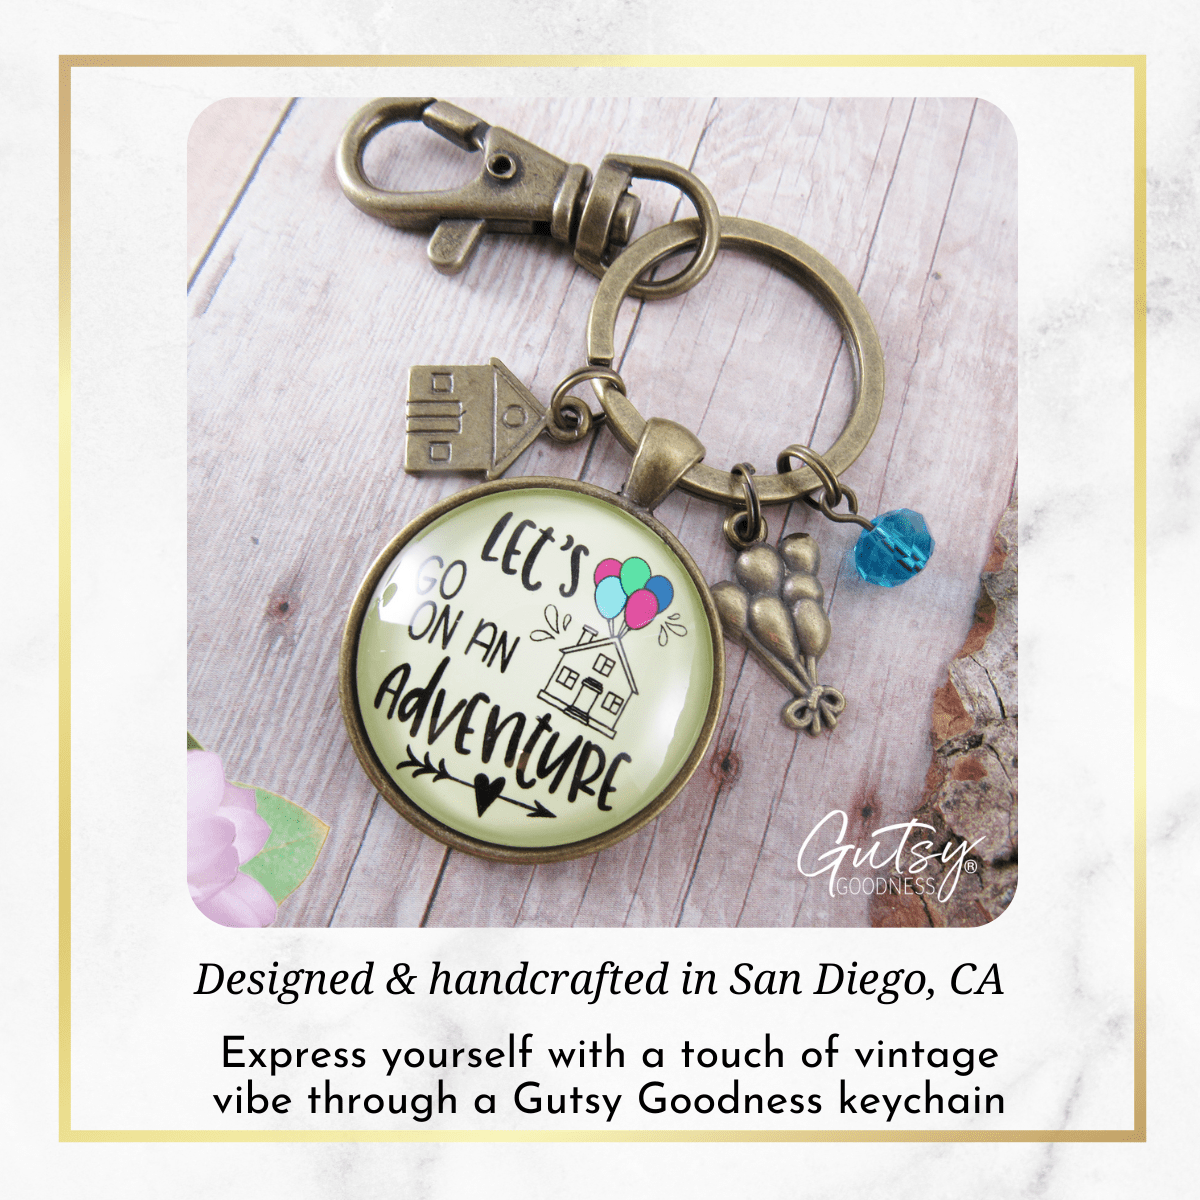 Let's Go On Adventure Keychain Balloon House Charm Amazing Life Up In Clouds Pendant - Gutsy Goodness